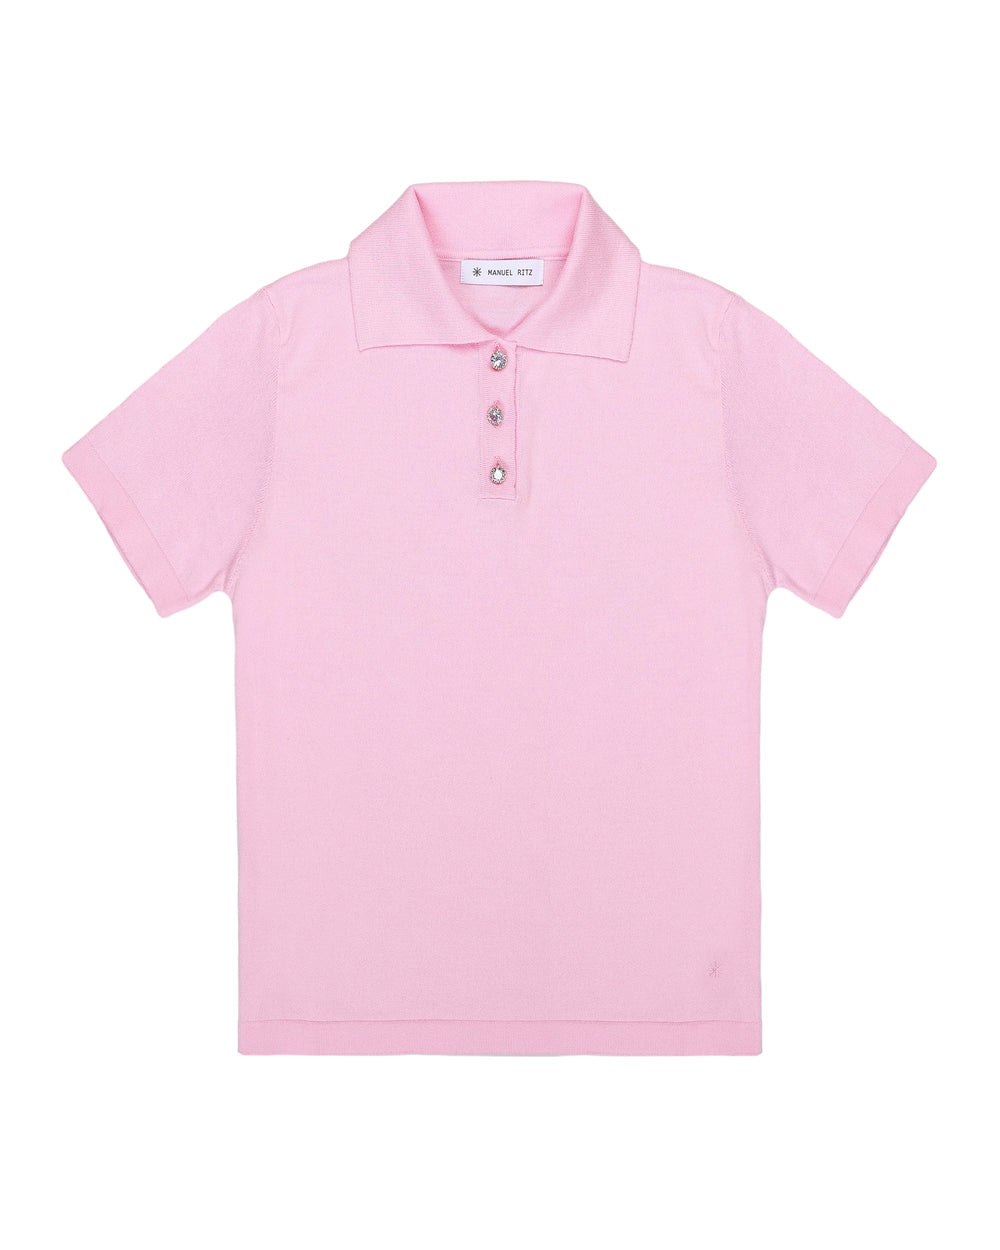 pink cotton polo shirt with jewel button